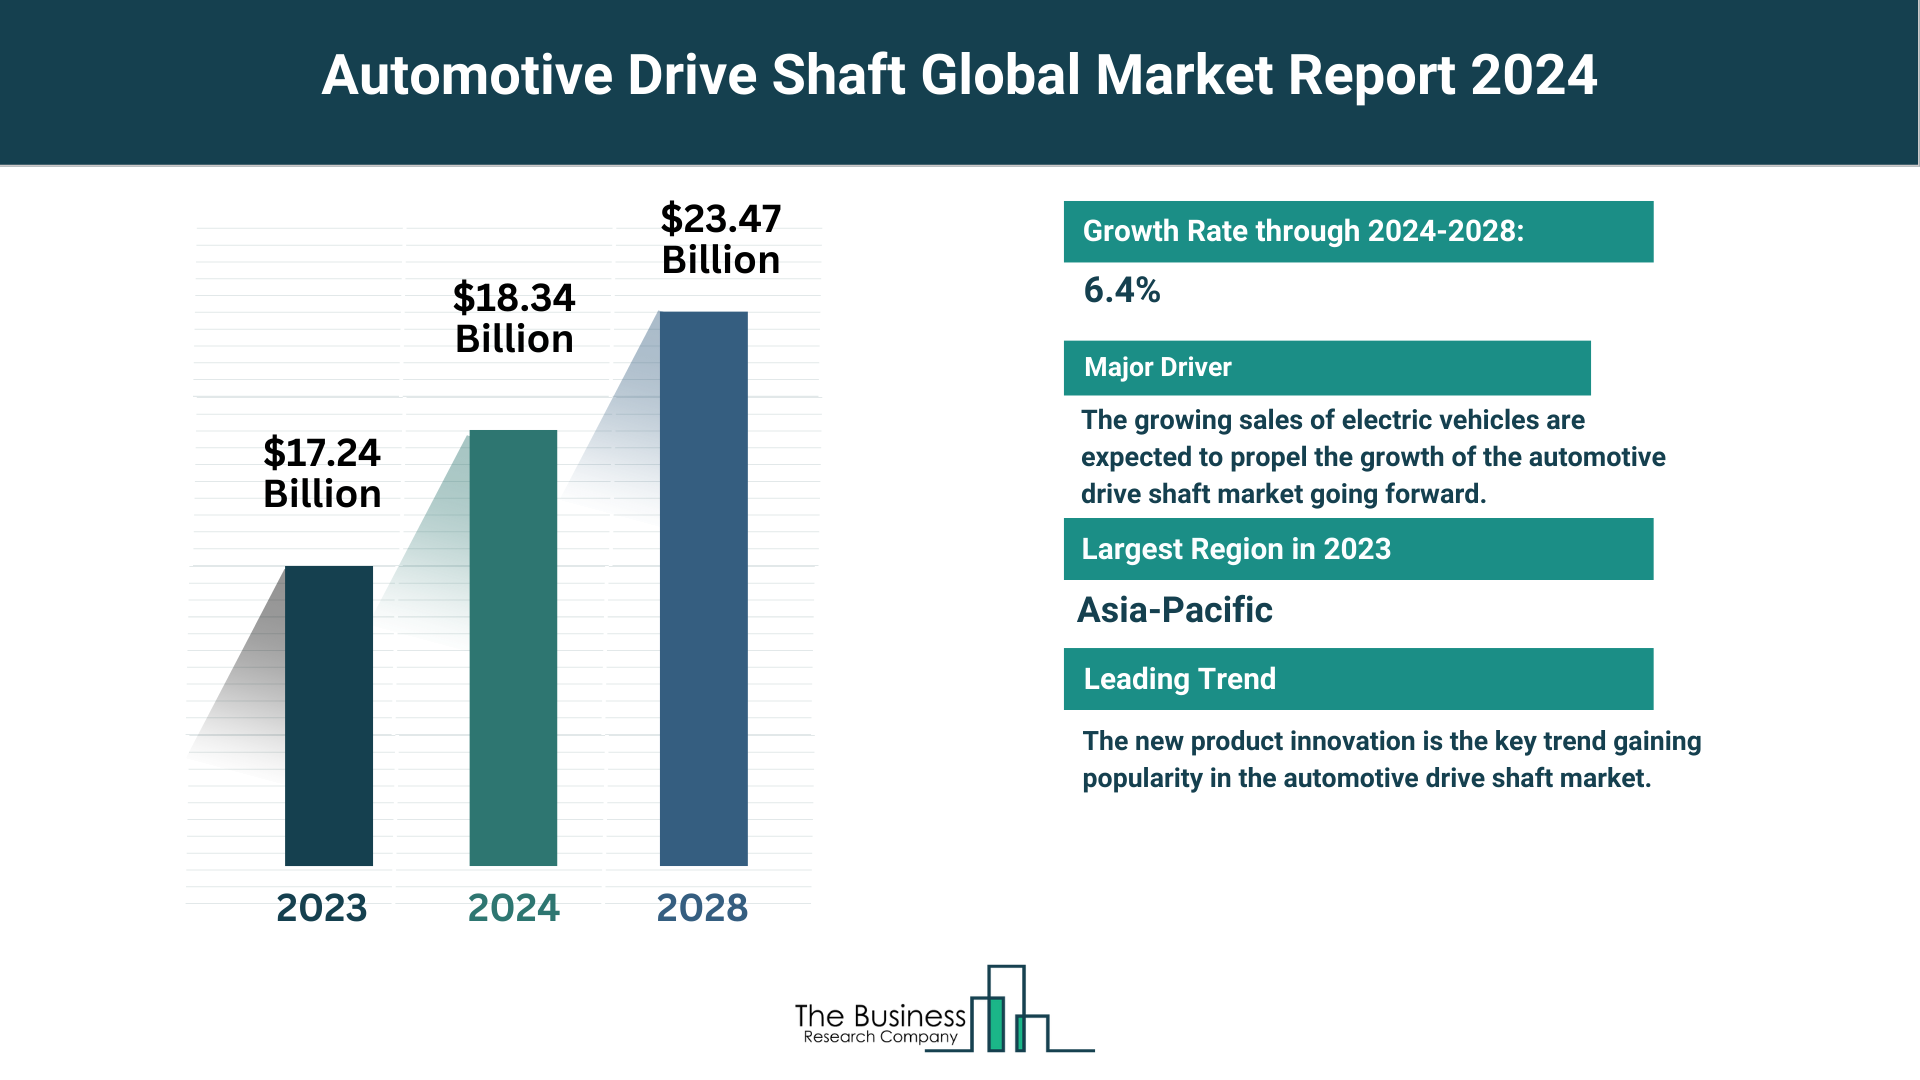 How Is the Automotive Drive Shaft Market Expected To Grow Through 2024-2033?